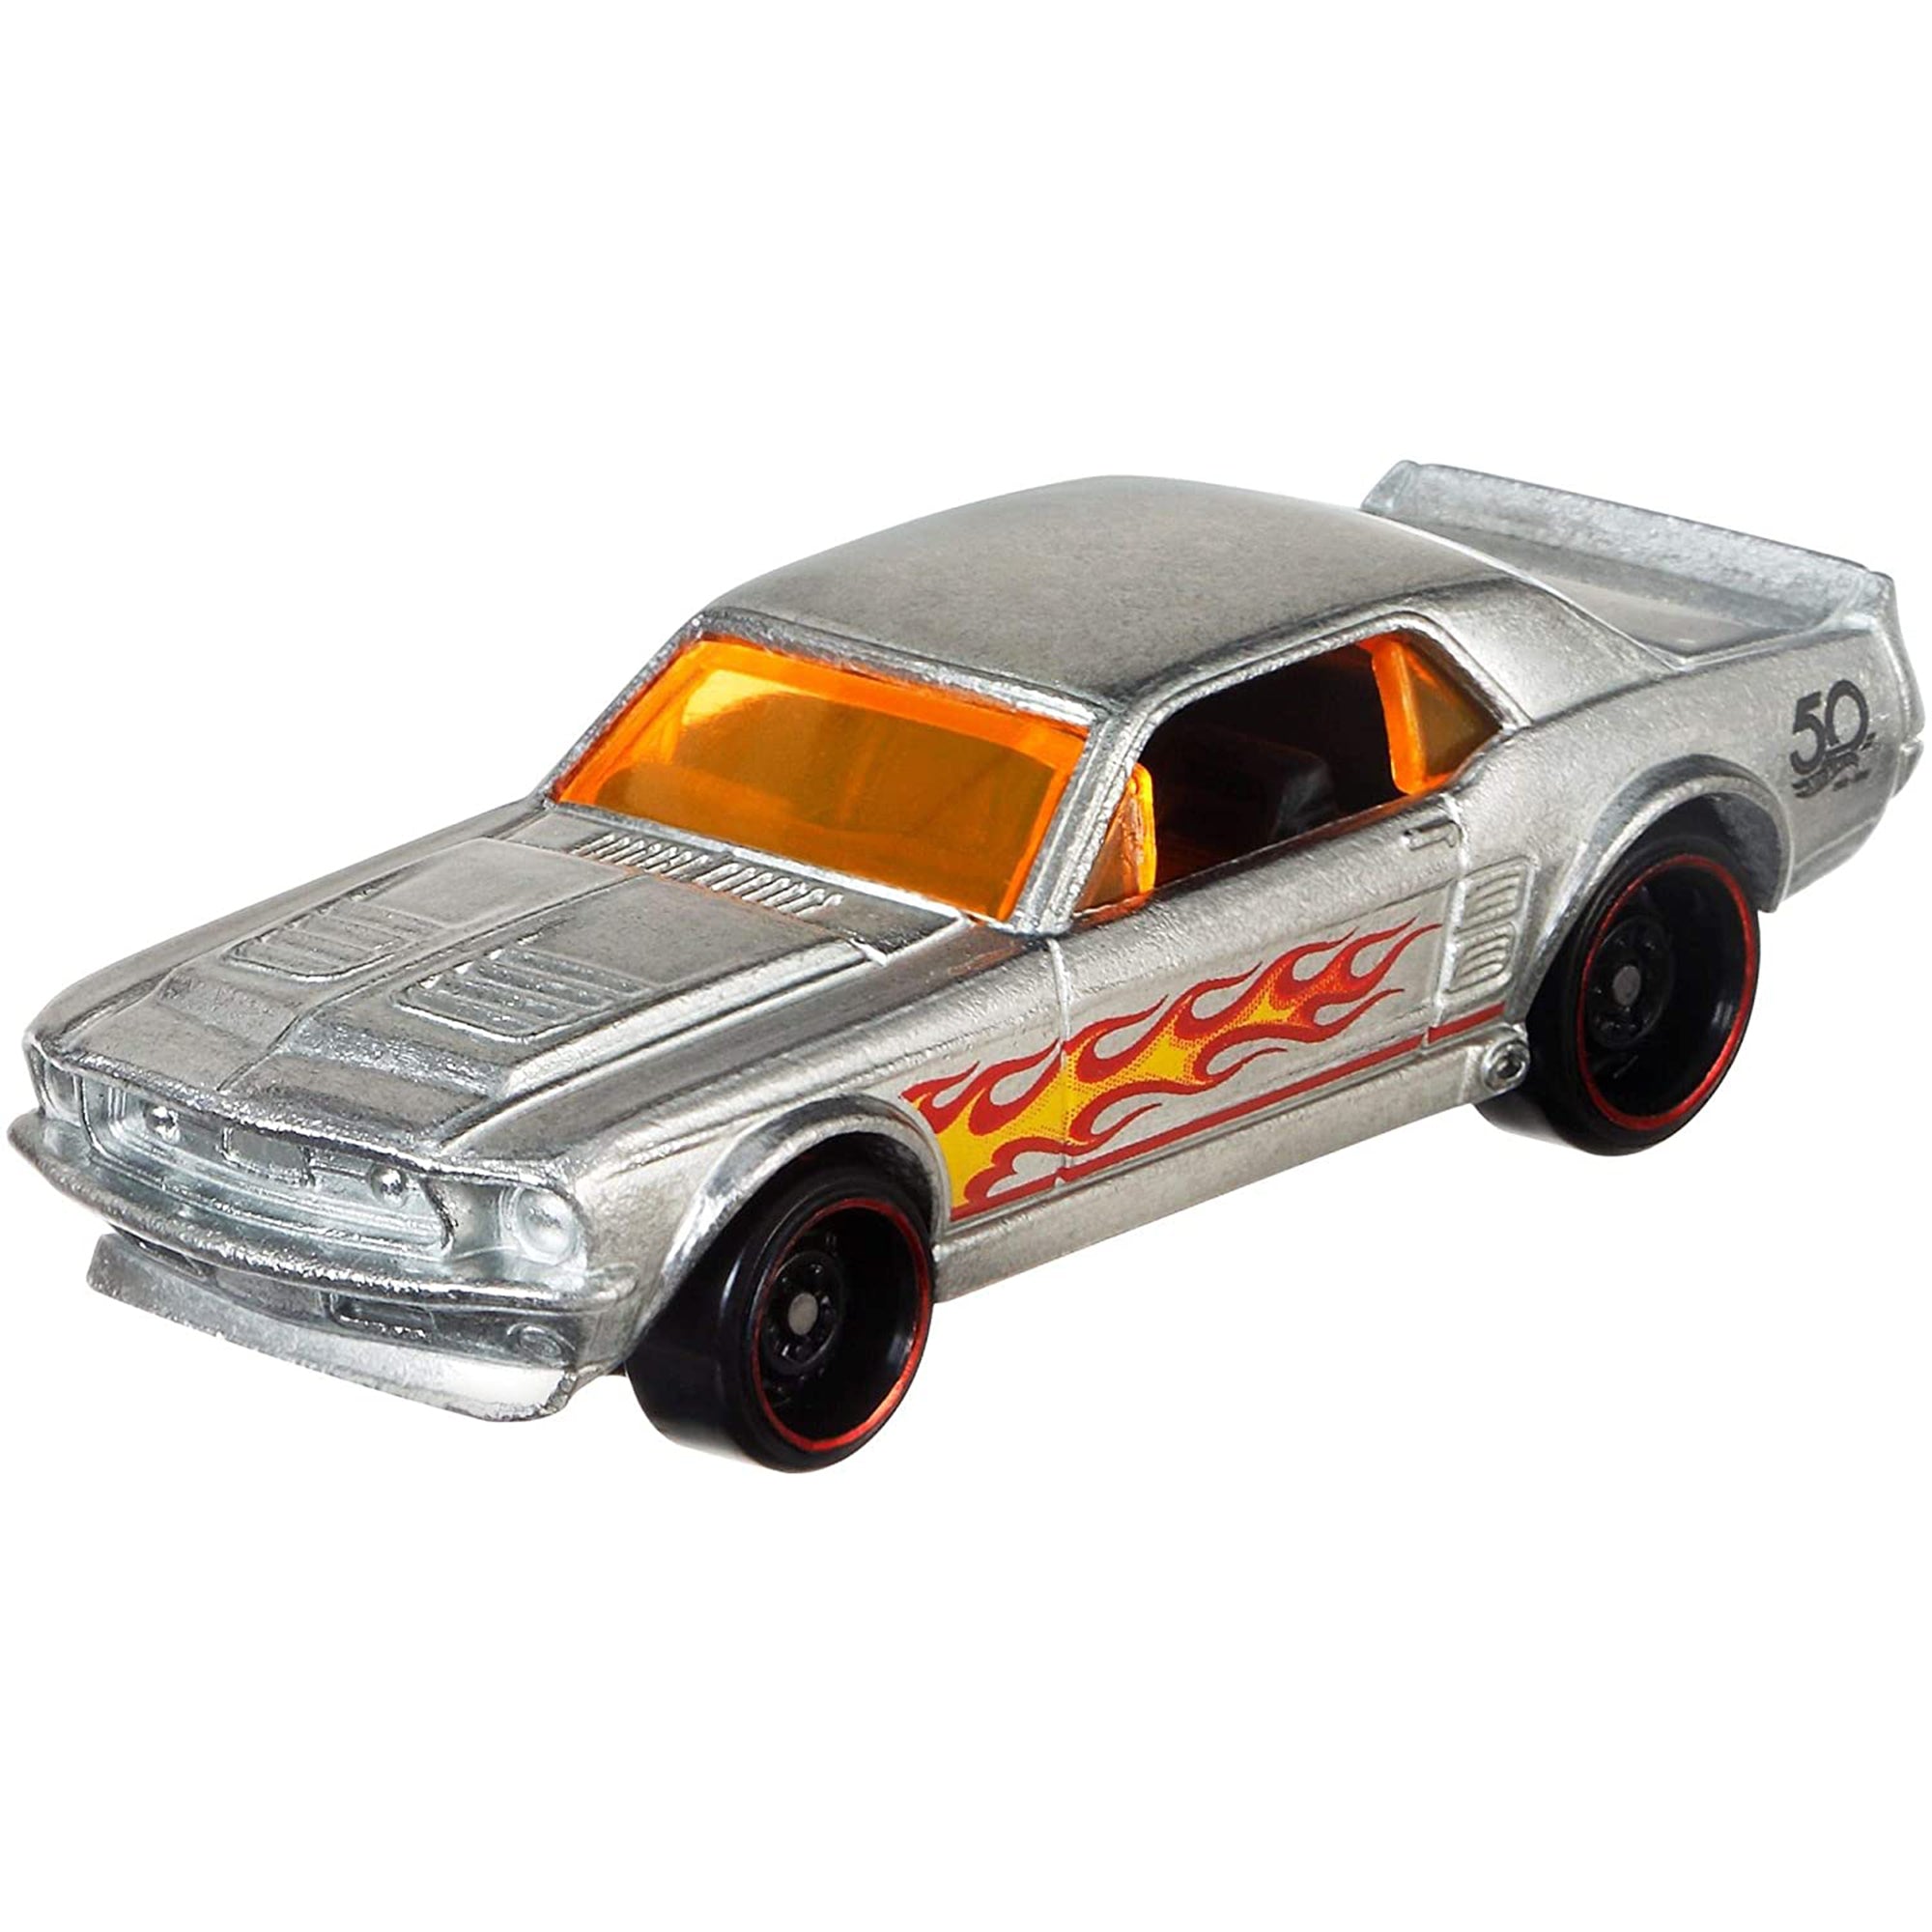 Modellino Hot Wheels '67 Ford Mustang Coupe 50° anniversario 2802